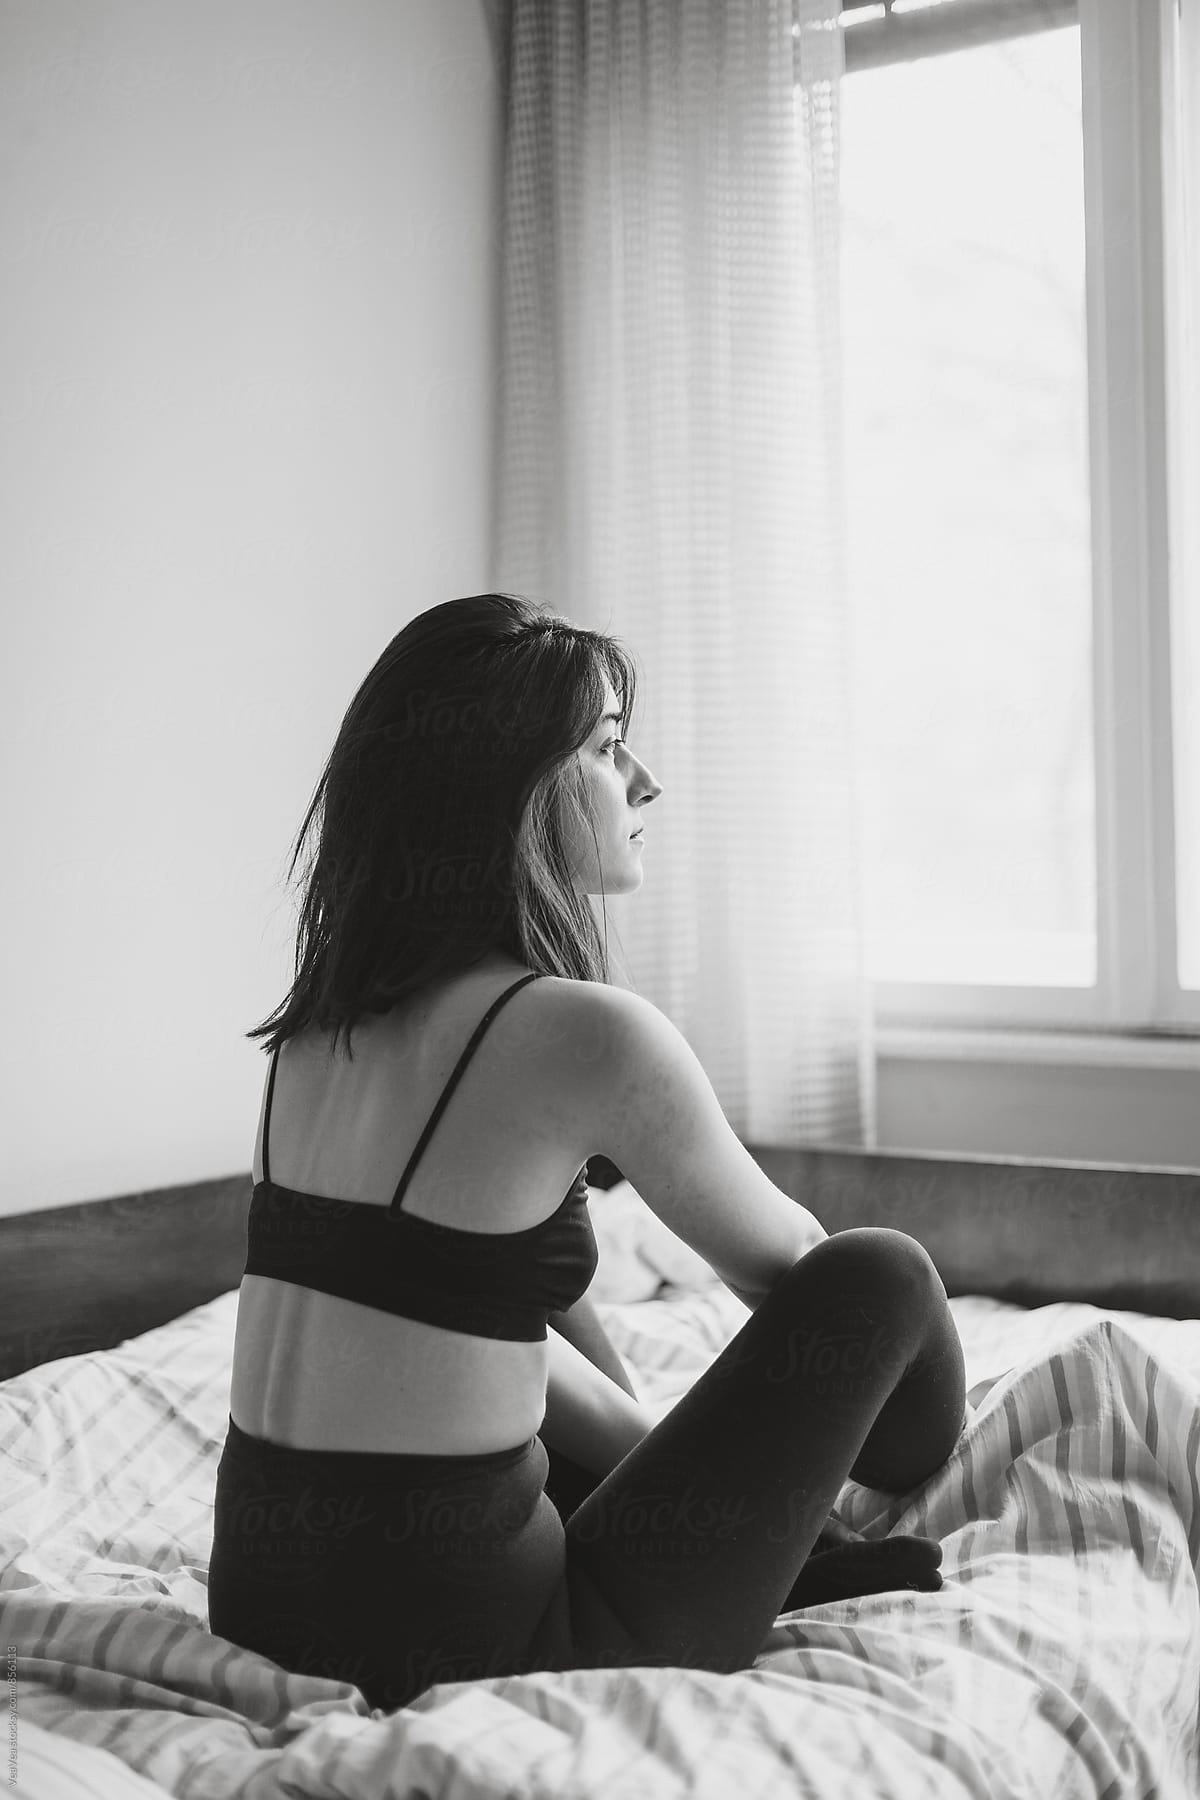 Close Up Of Woman In Underwear On The Bed by Stocksy Contributor